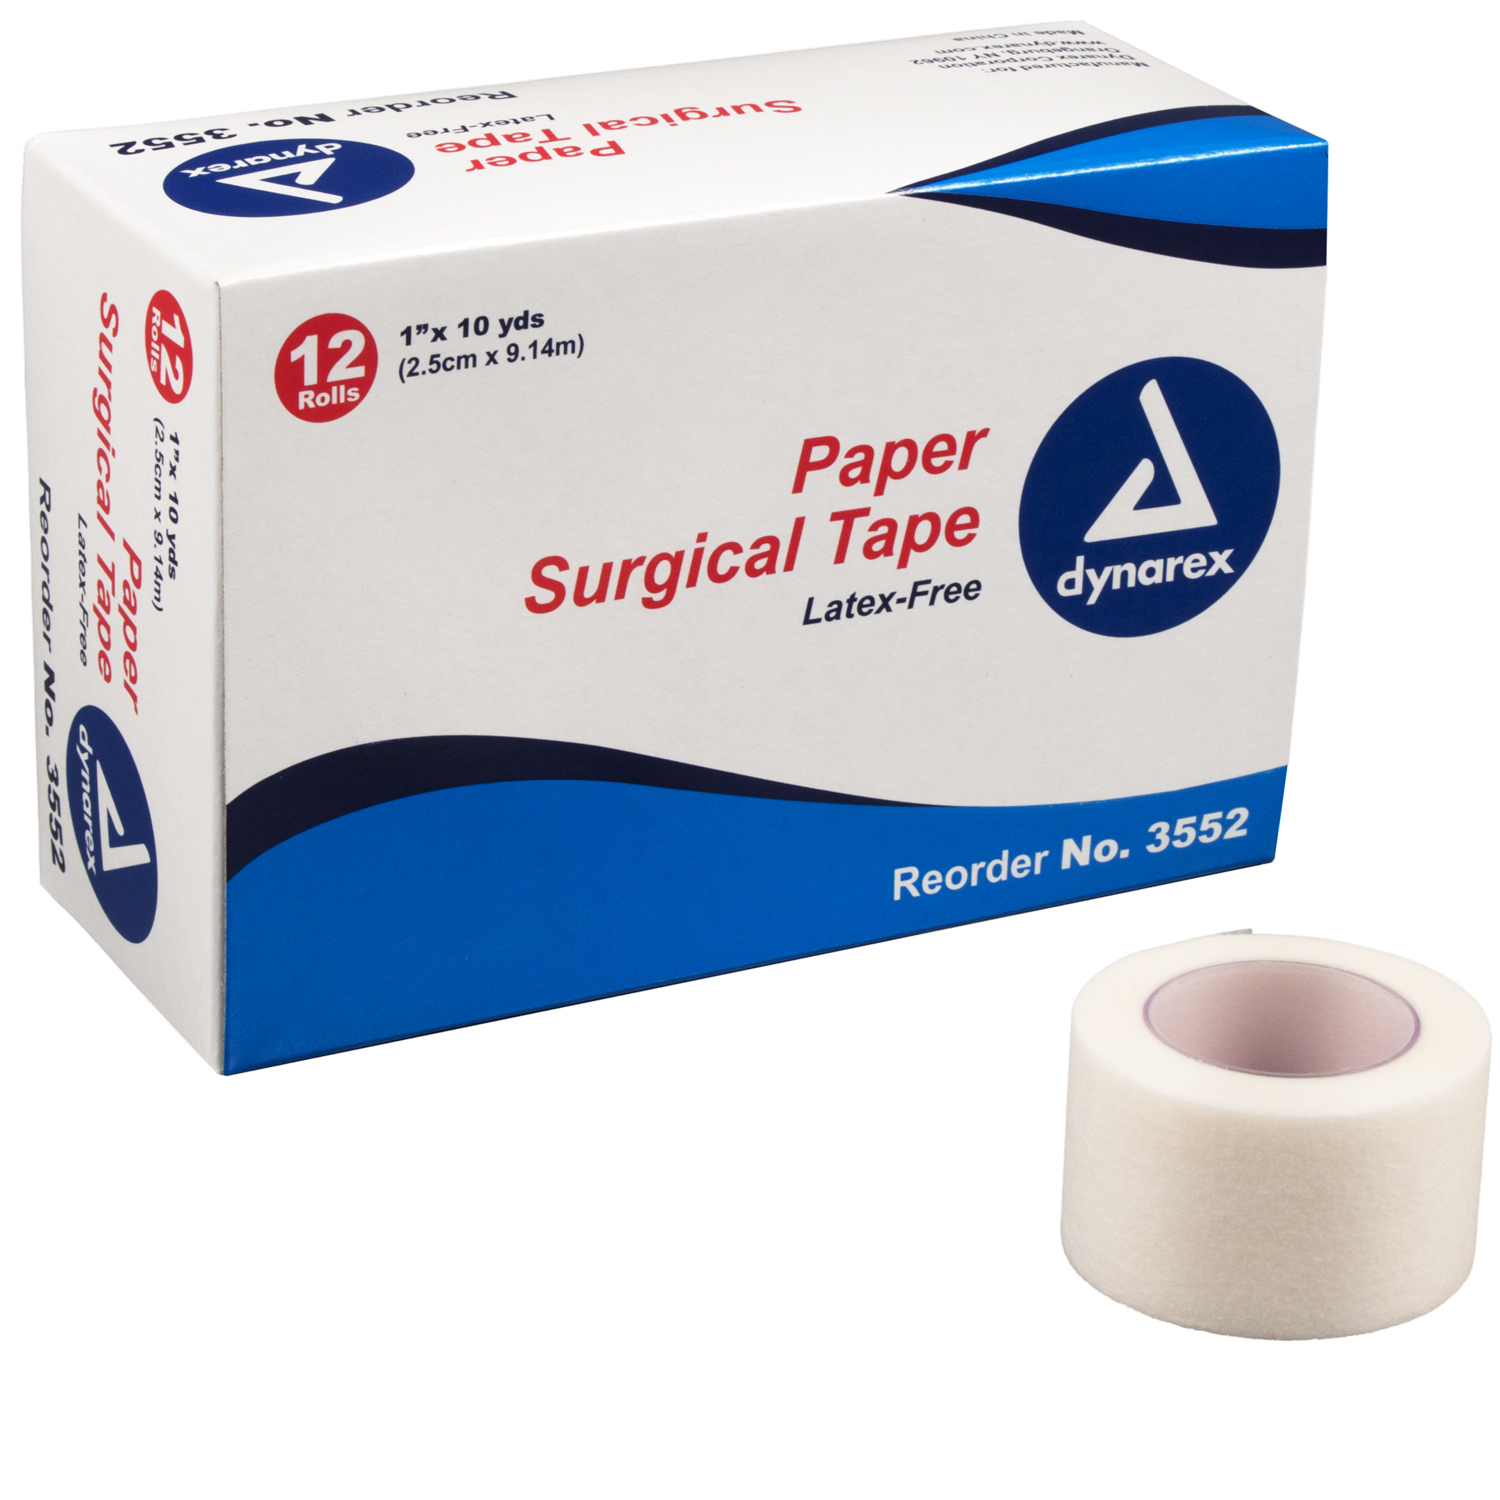 Paper Surgical Tape - 1" x 10 yds